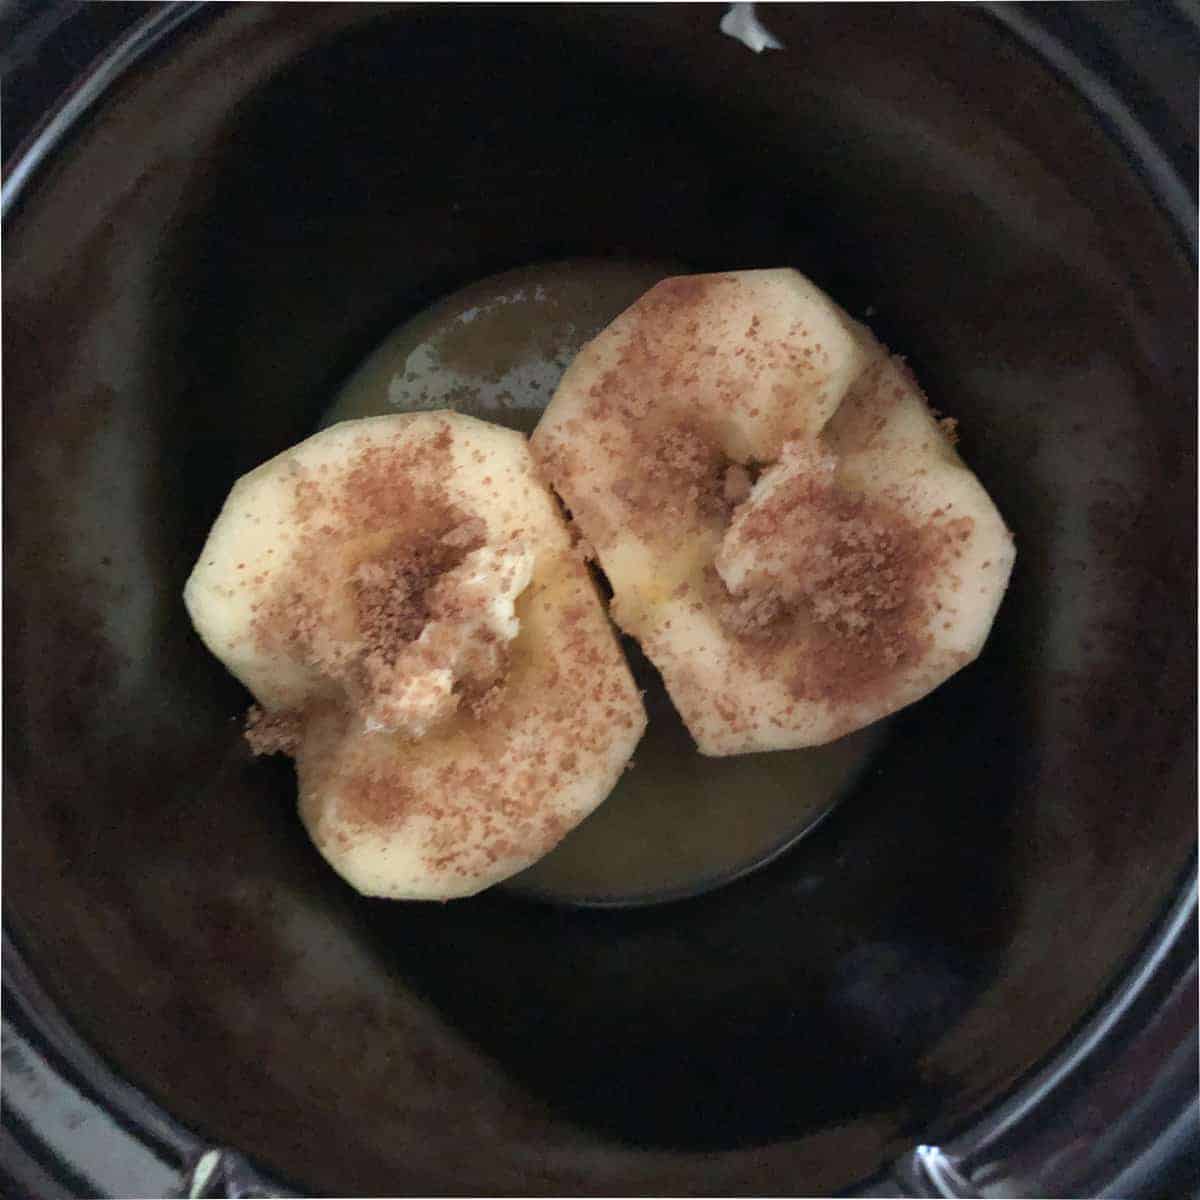 Peeled apple sliced in half sprinkled with butter and cinnamon is small crockpot.